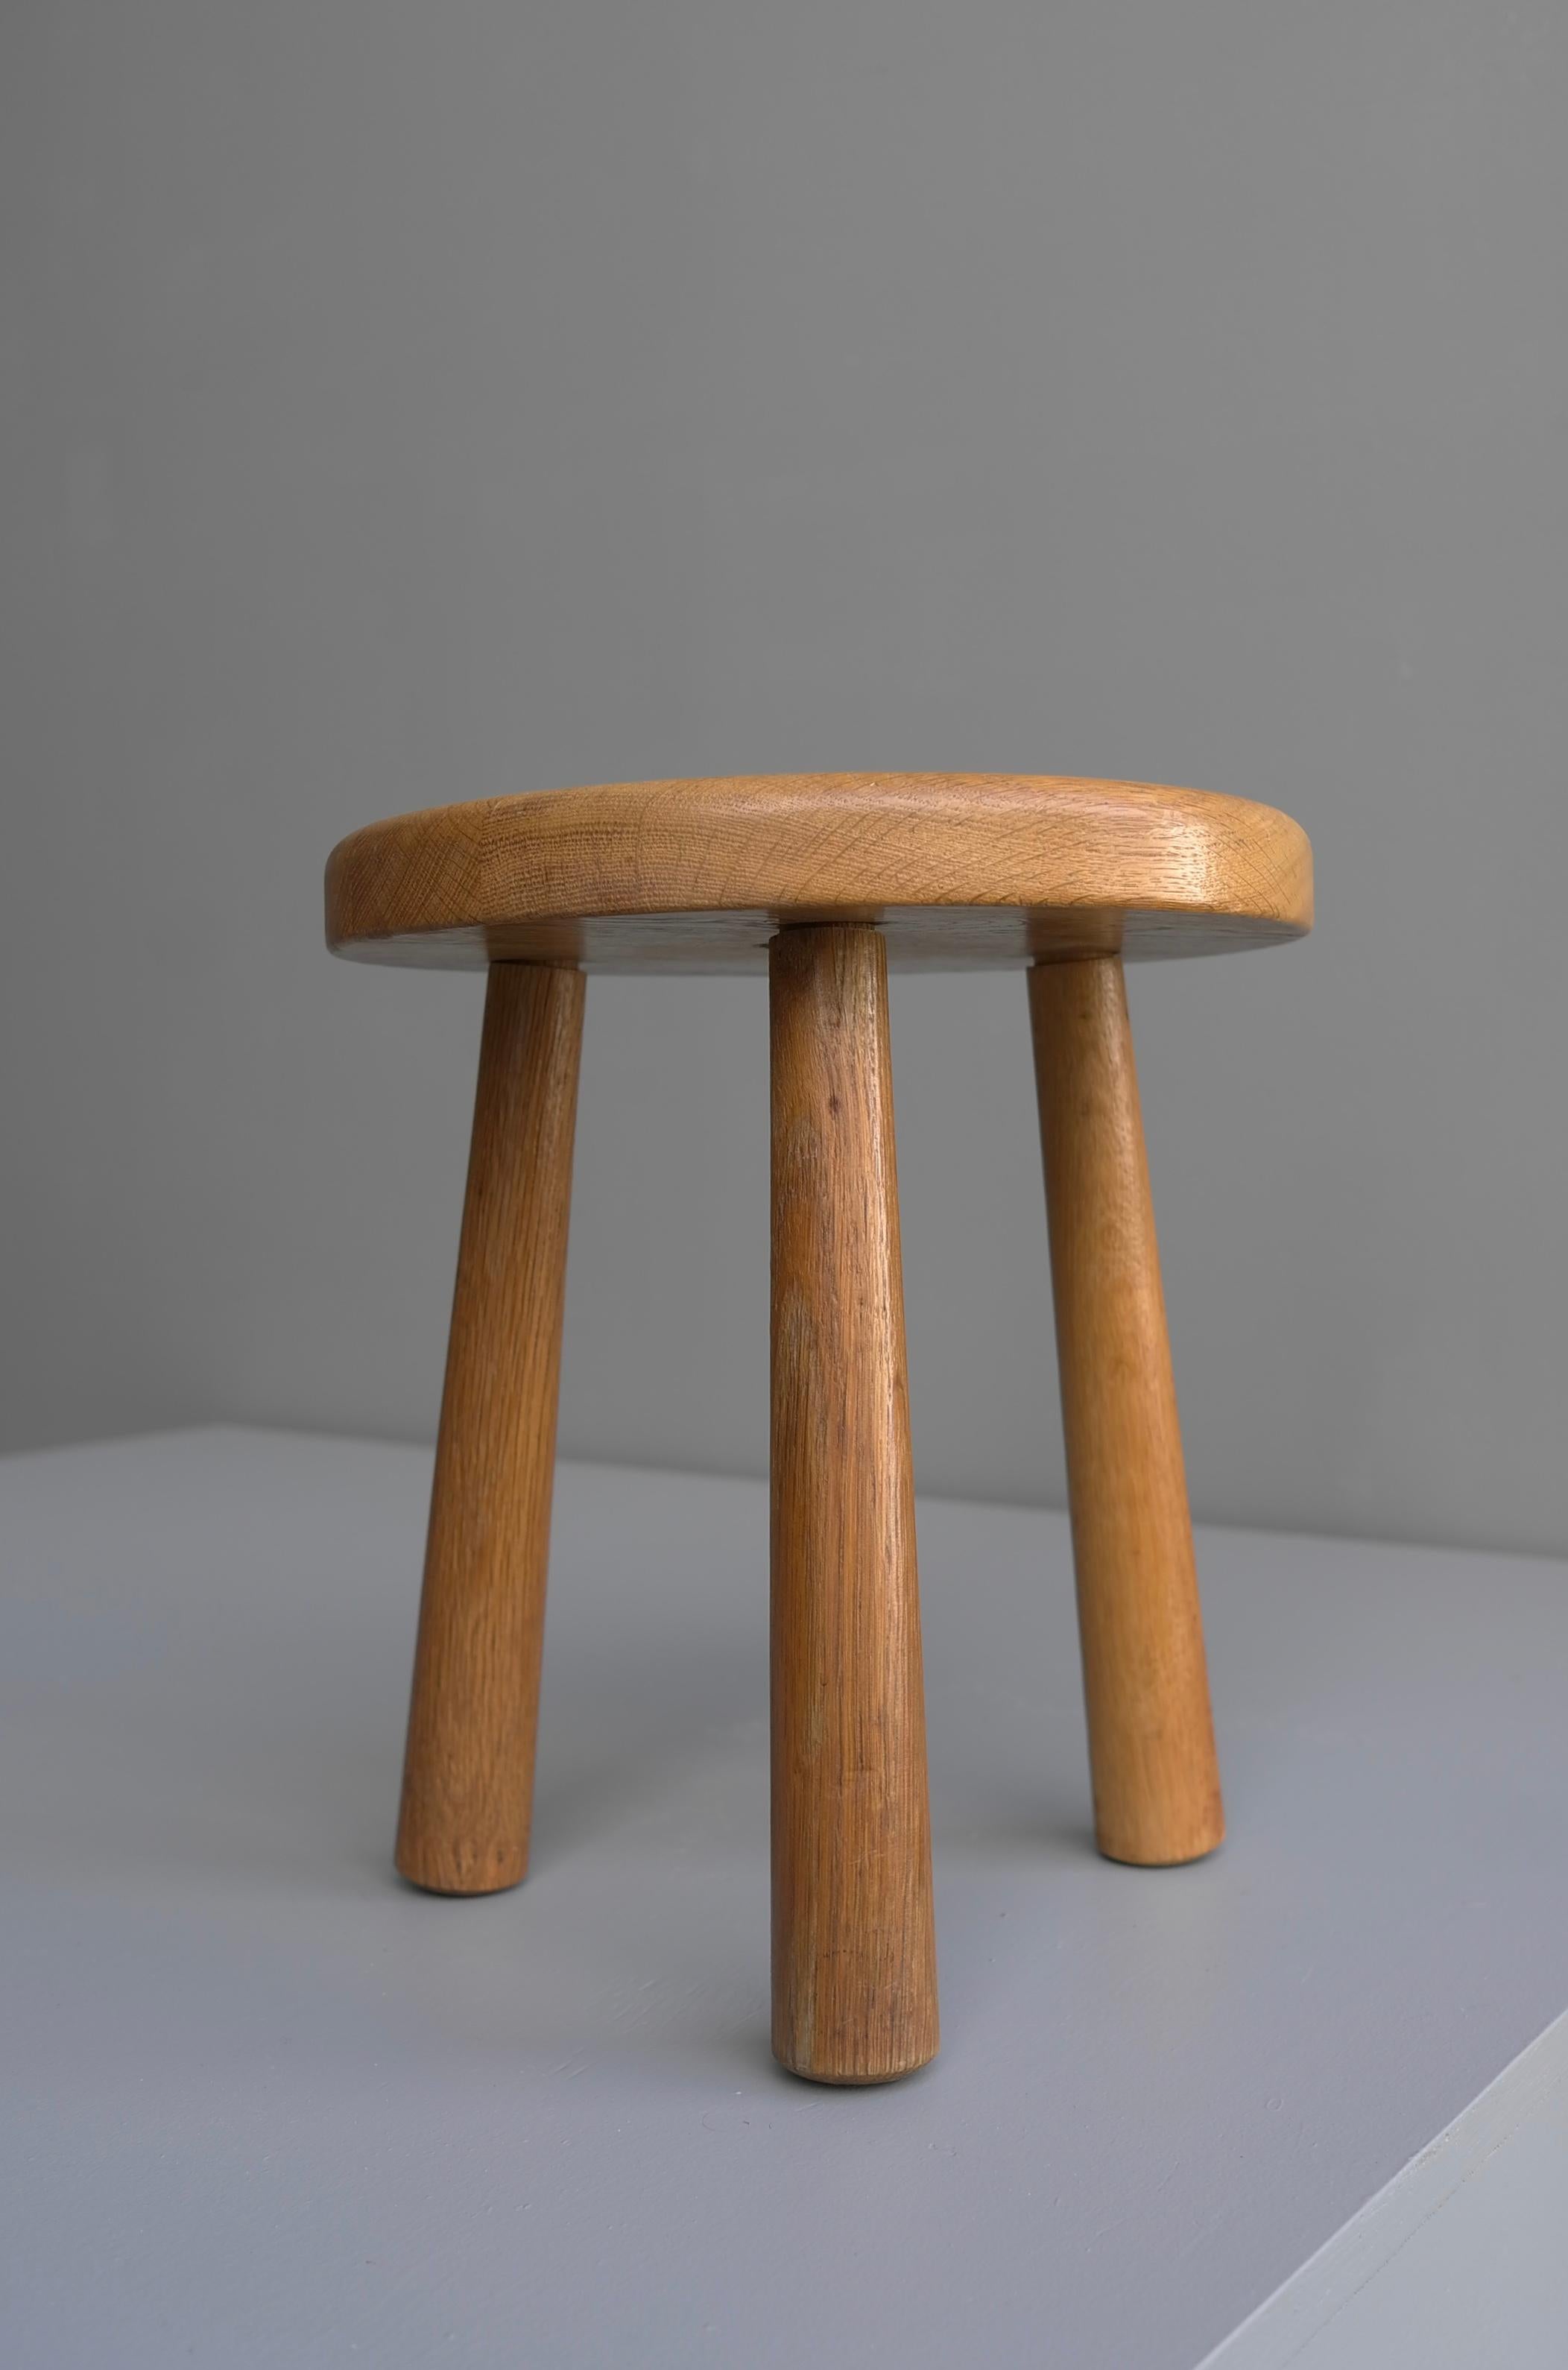 Midcentury French Oak stool in style of Charlotte Perriand.